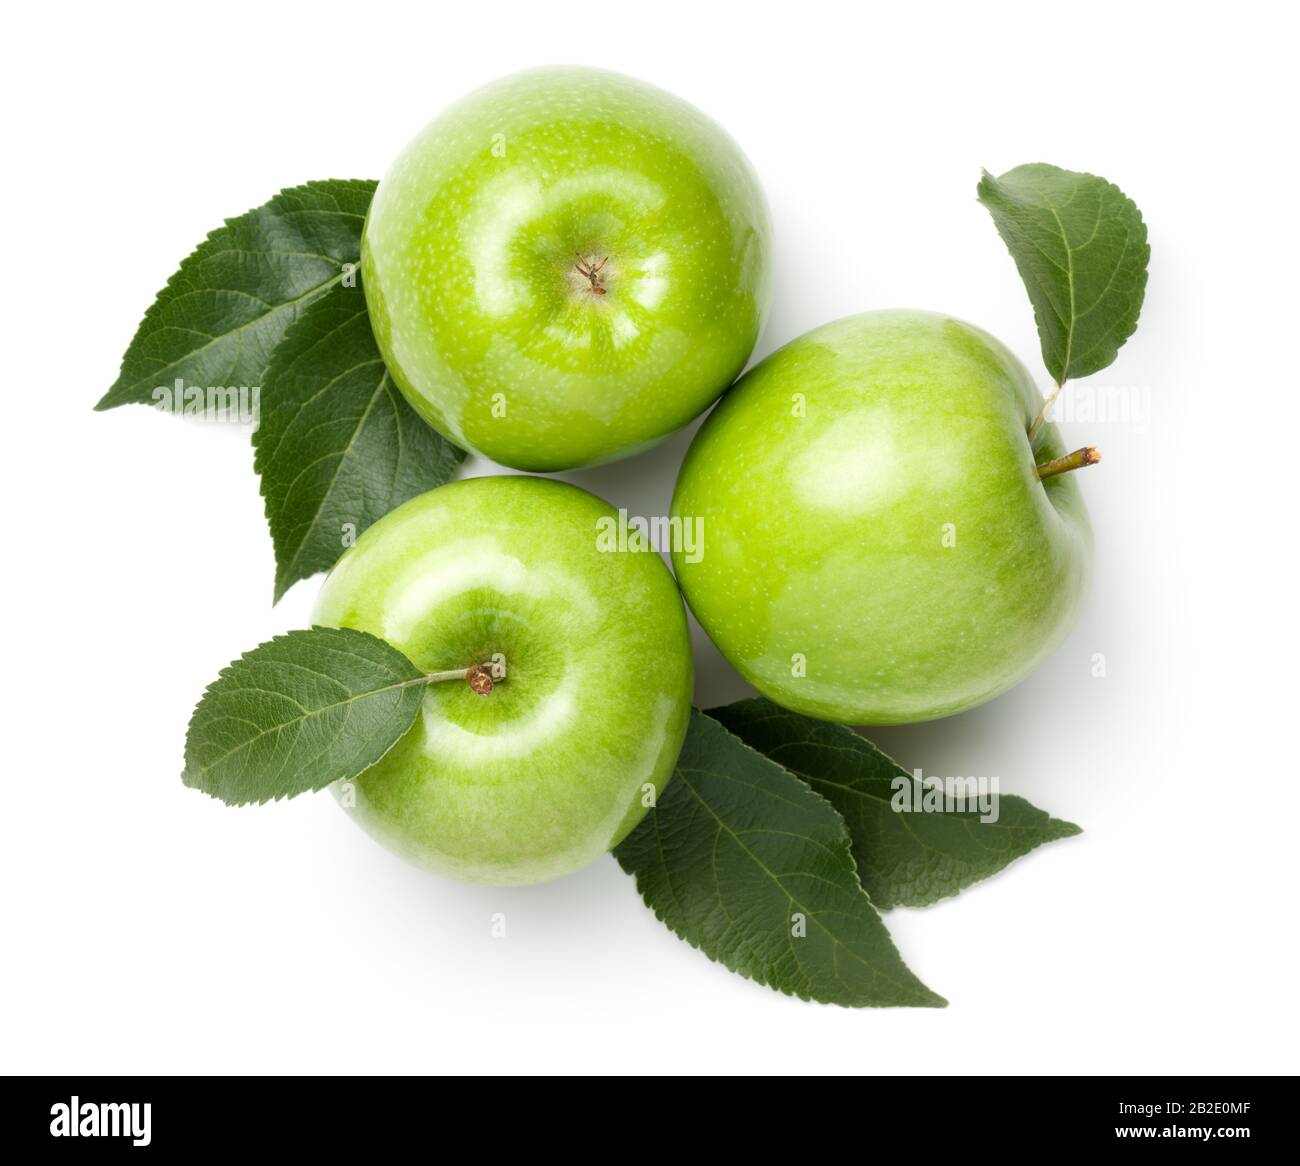 Green apples isolated on white background. Granny smith apple. Top view, flat lay Stock Photo